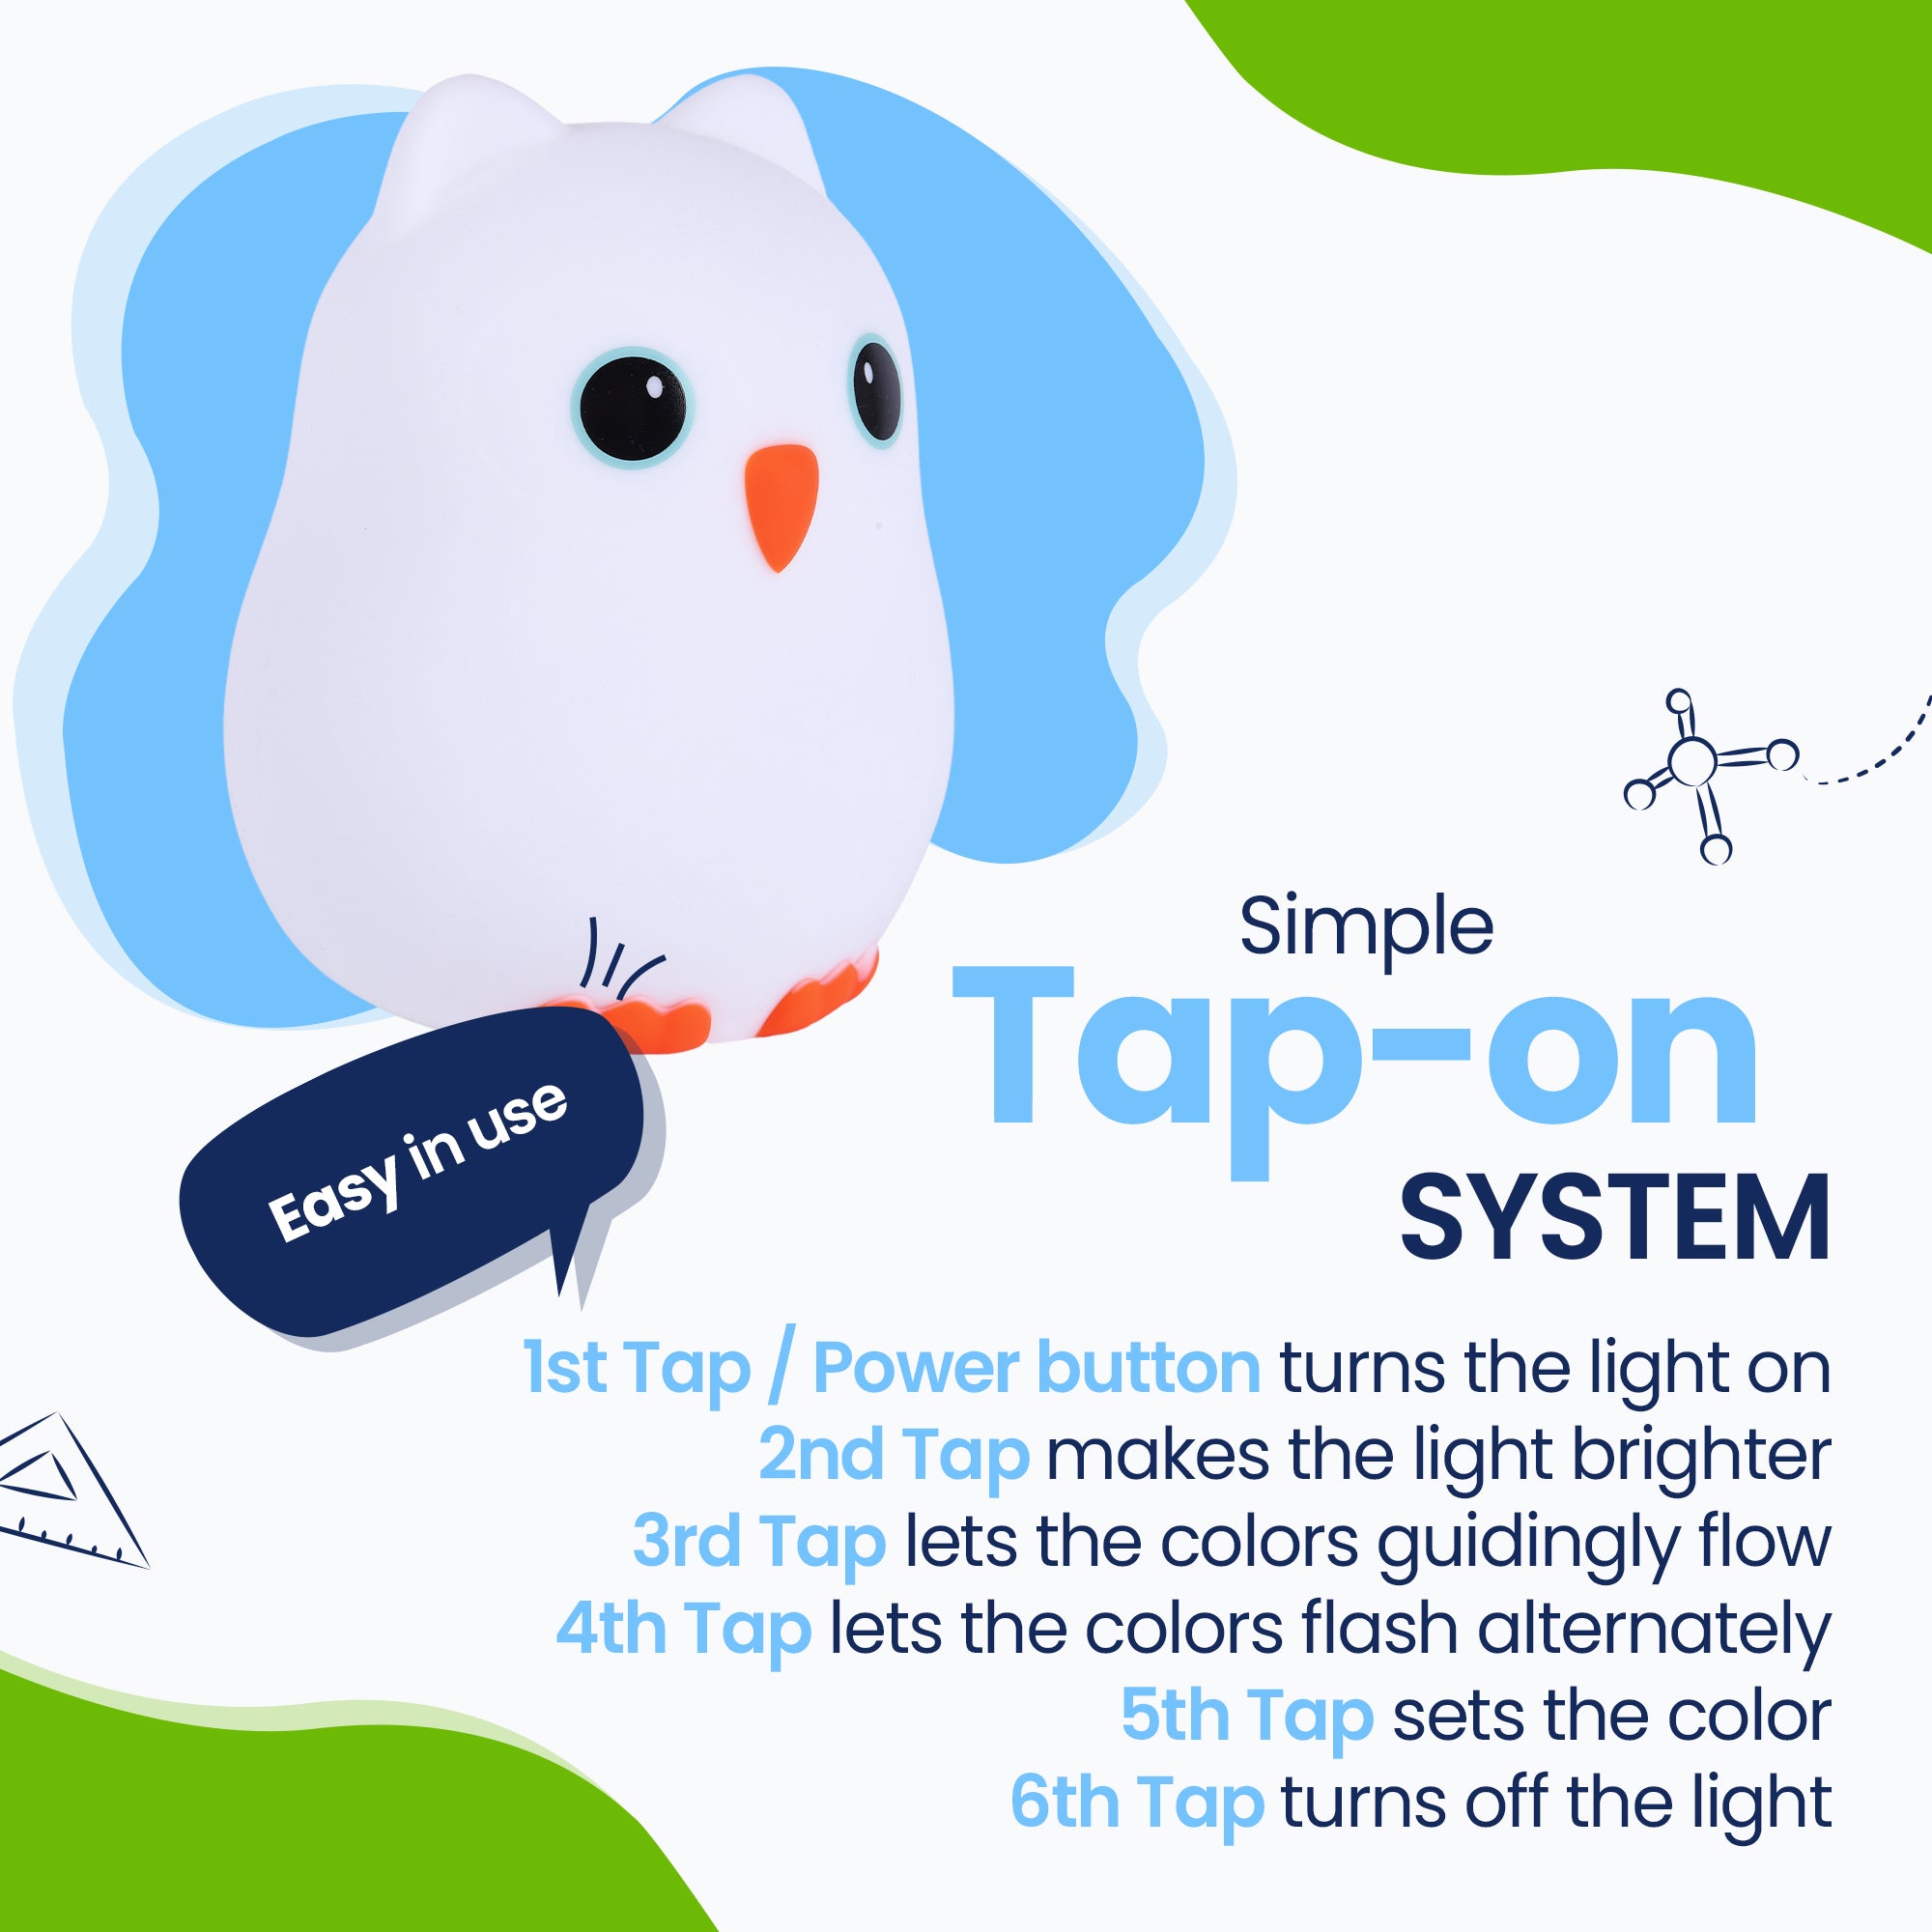 Simple Tap-on system - Easy to use - turn on the light - make the light brighter - let the colors flow - alternately flash colors - fix the color - turn off the color